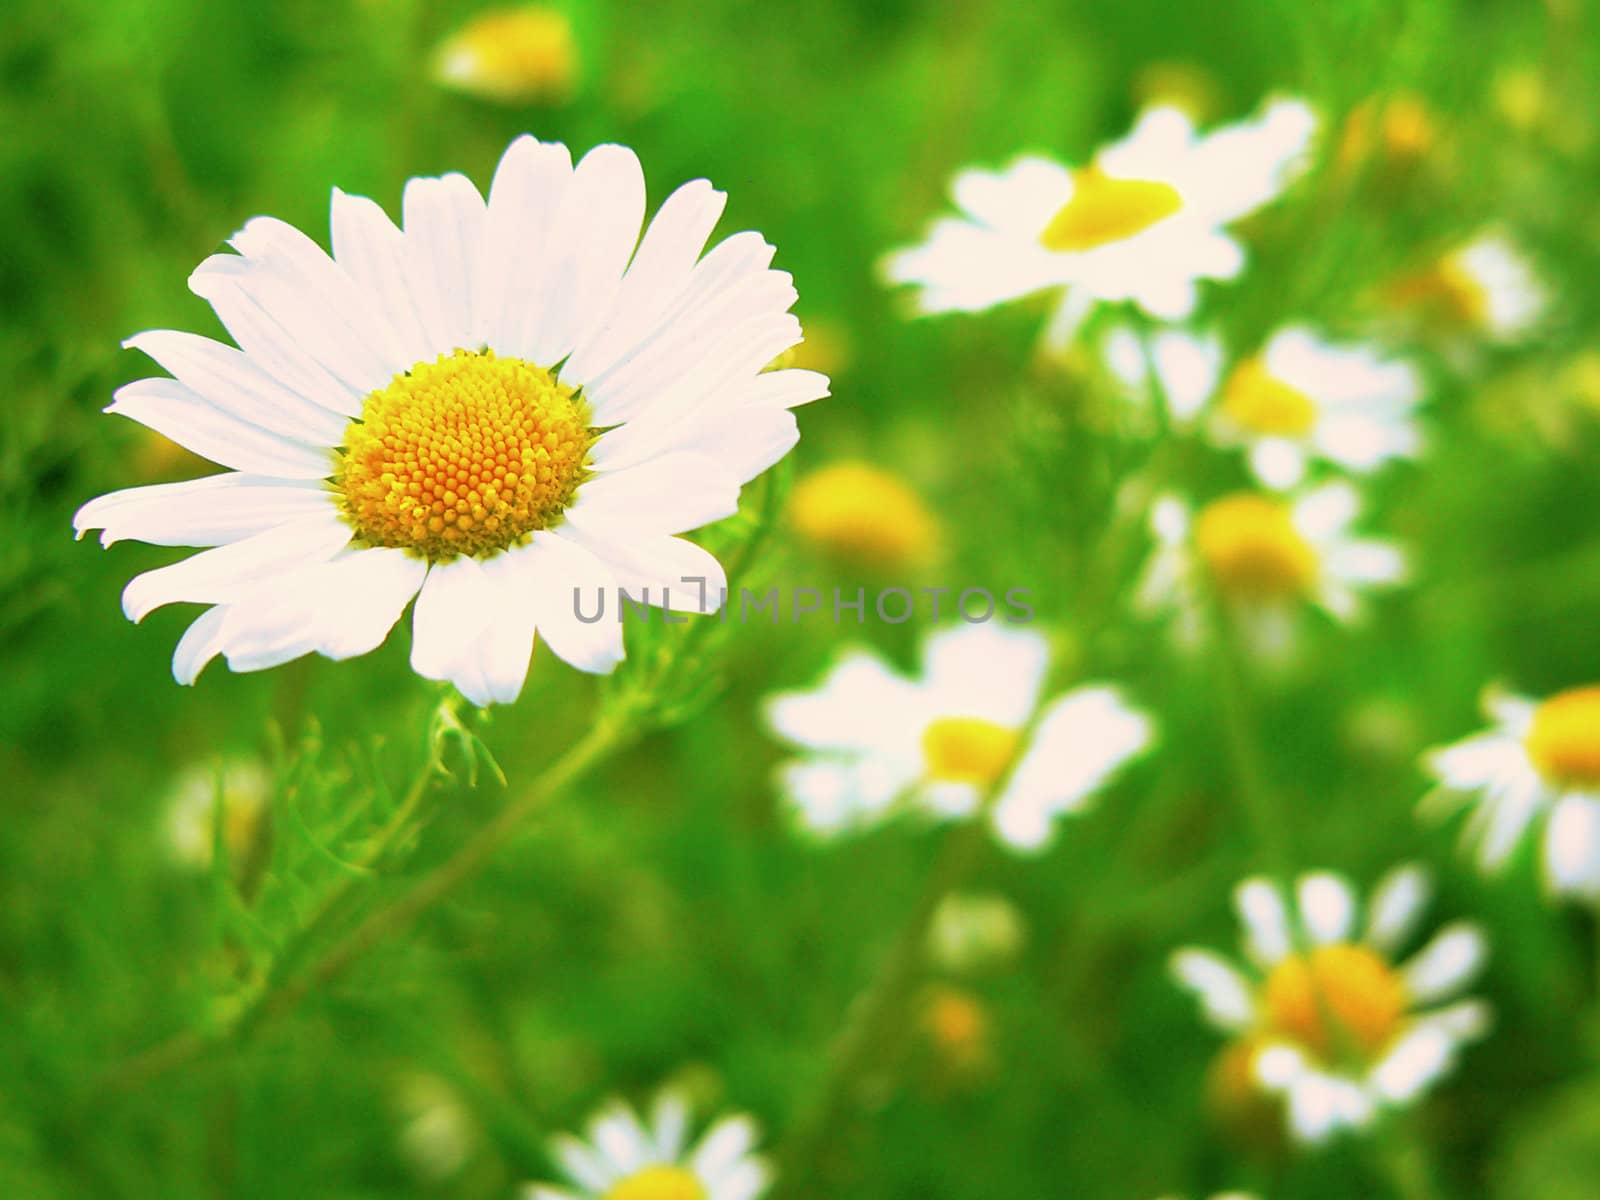 White and yellow daisy in grass field.